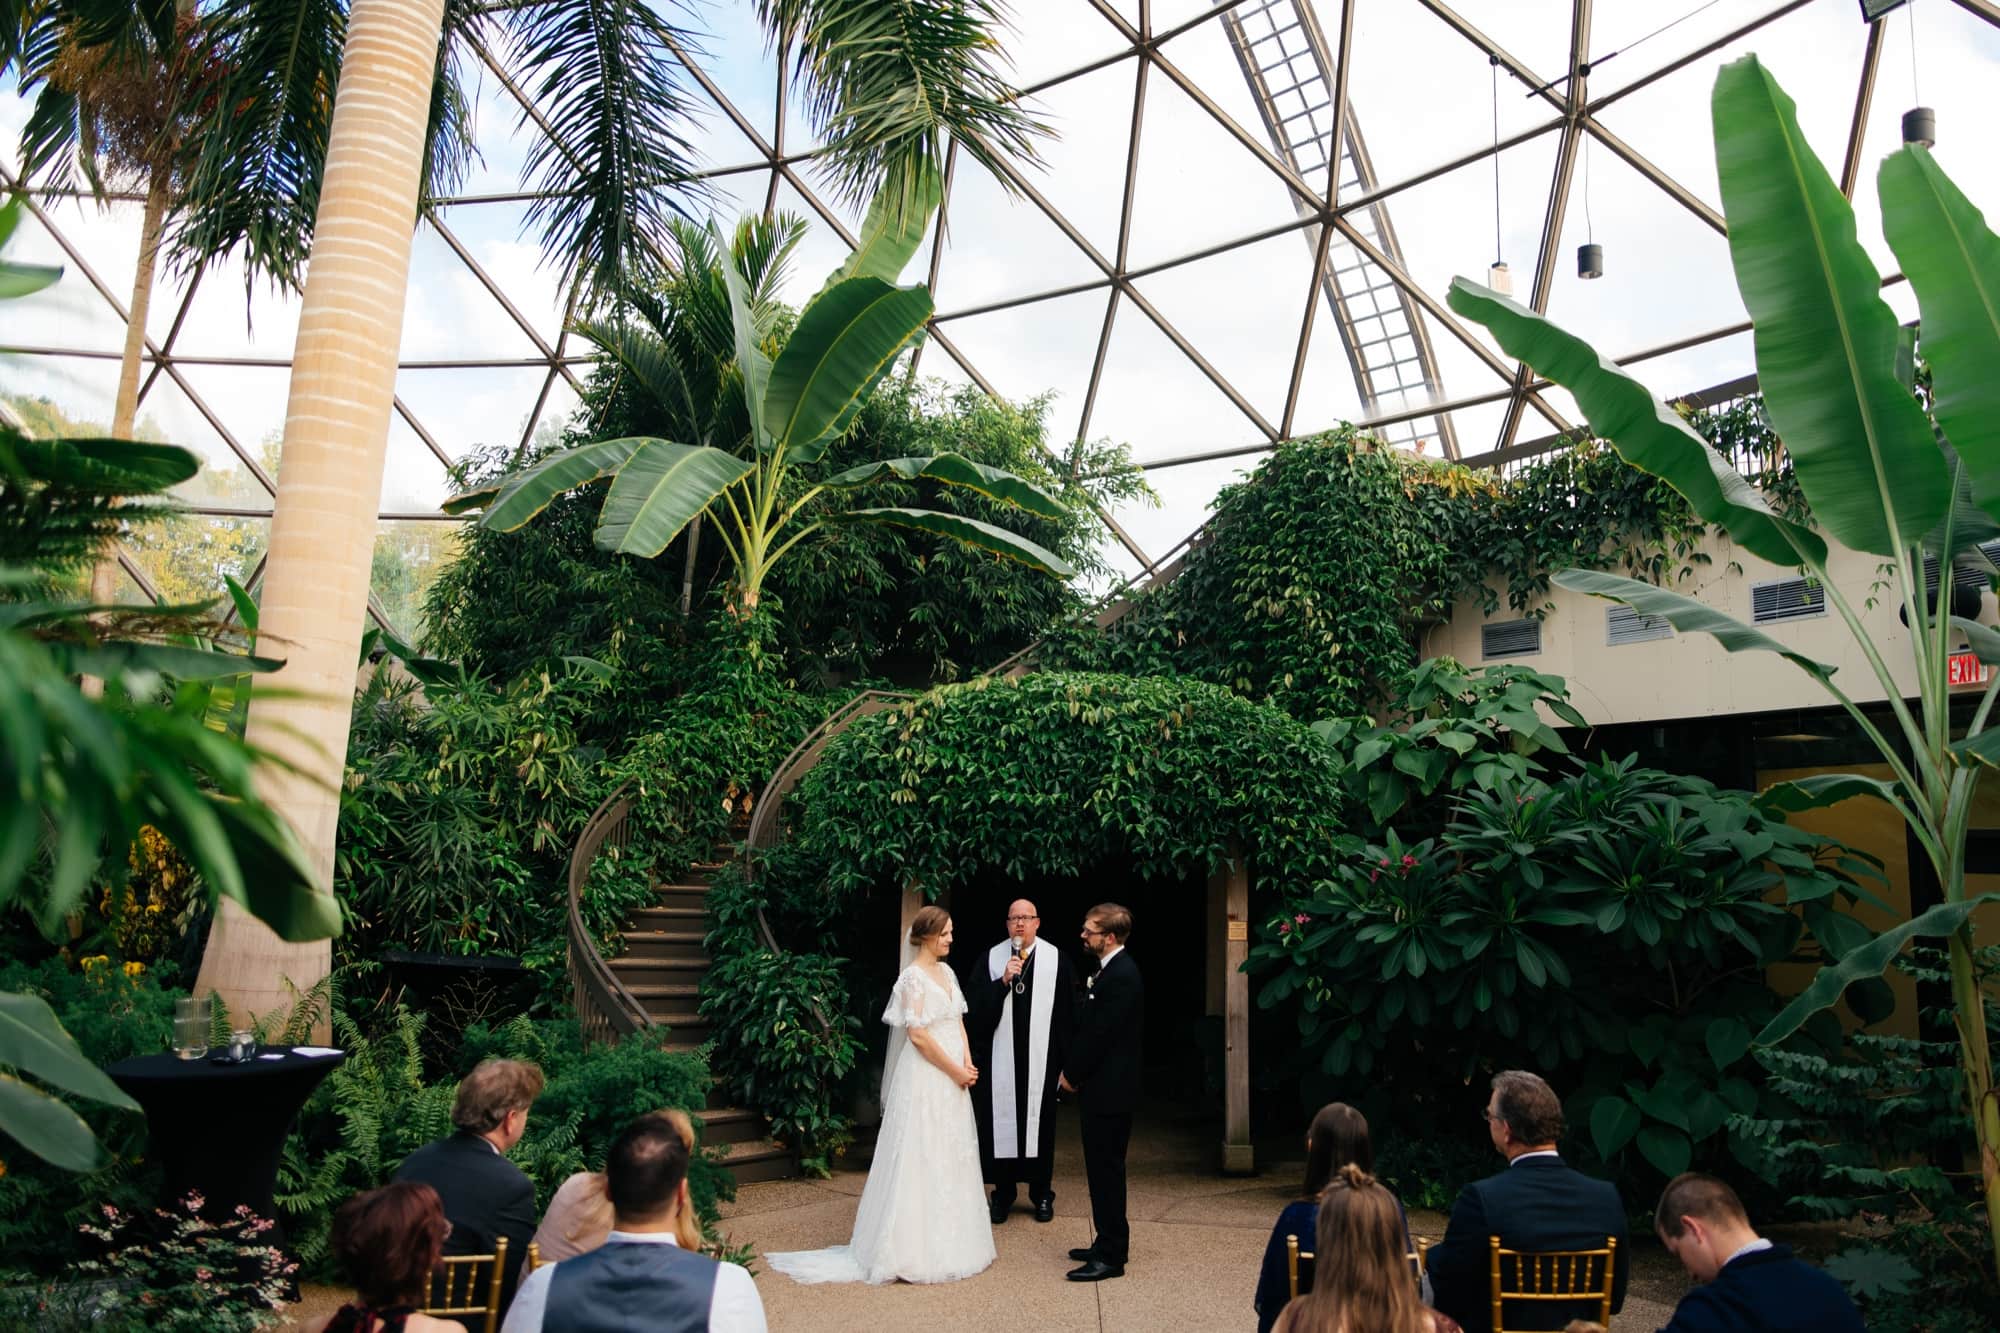 Wedding ceremony inside the Conservatory at the greater Des Moines botanical Garden